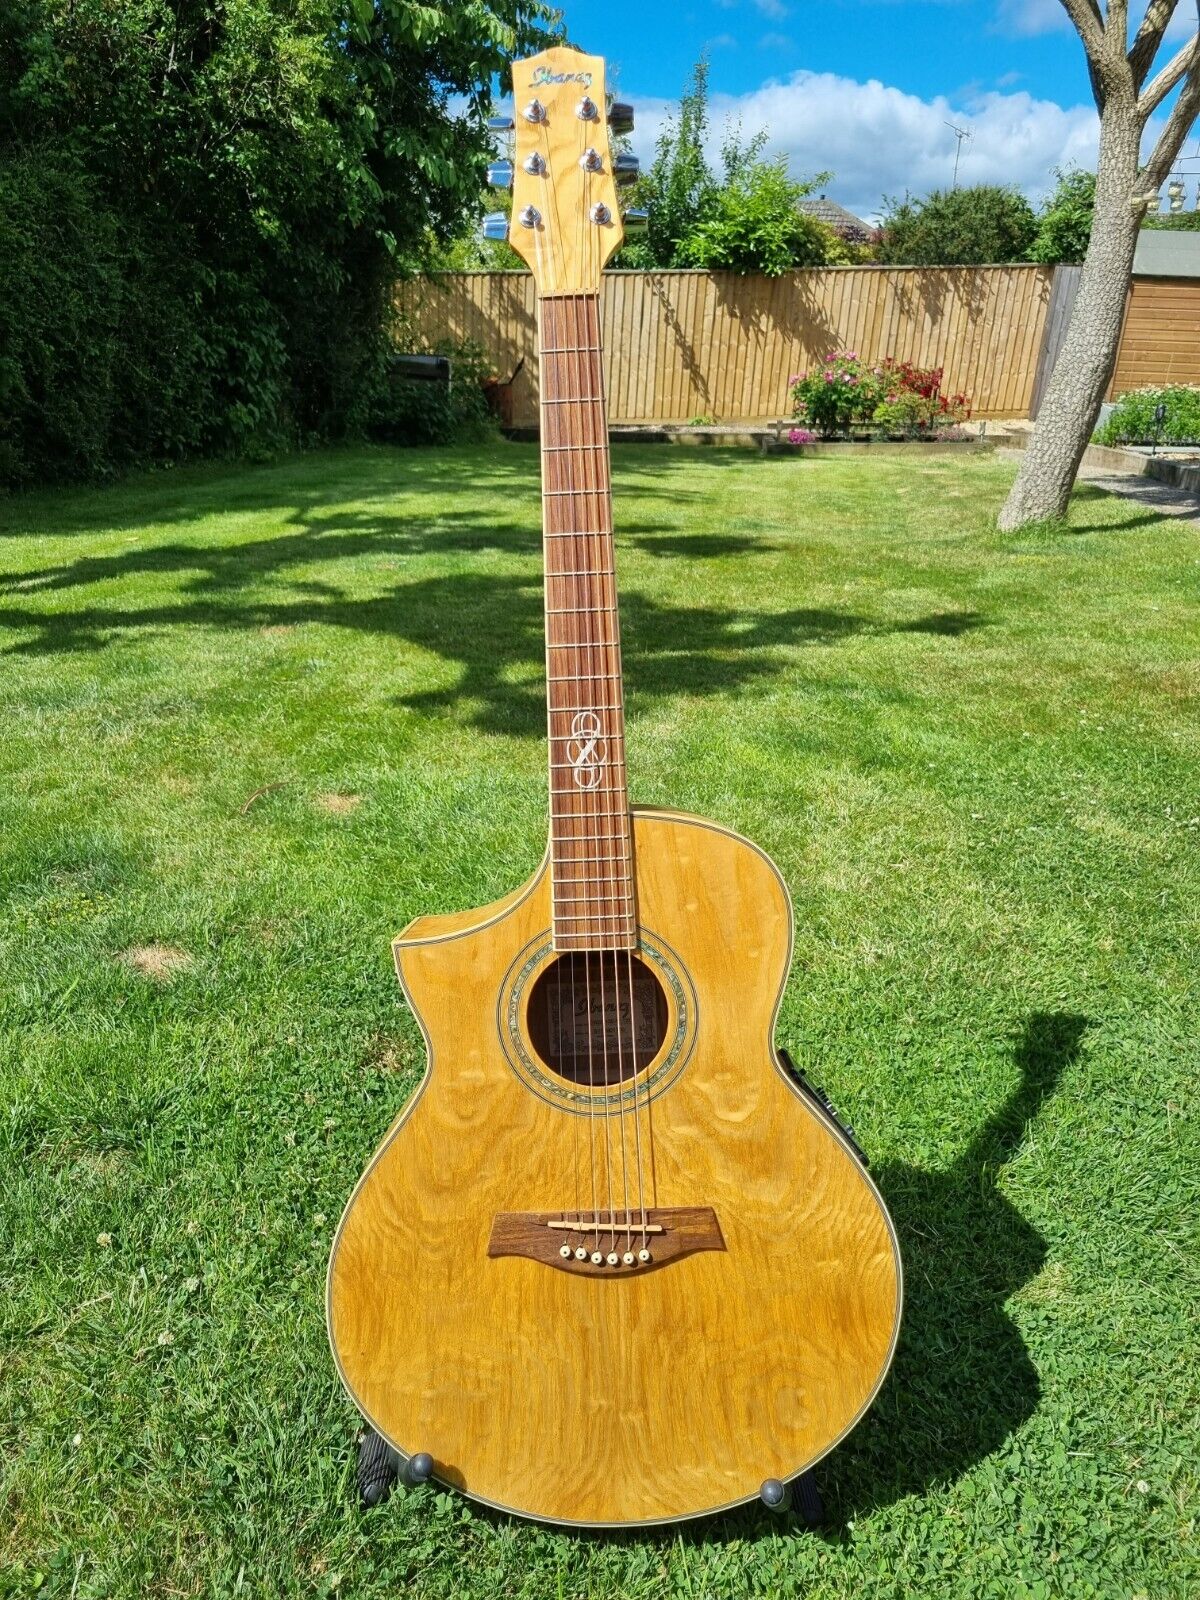 **IBANEZ LEFT HANDED ELECTRO-ACOUSTIC GUITAR**